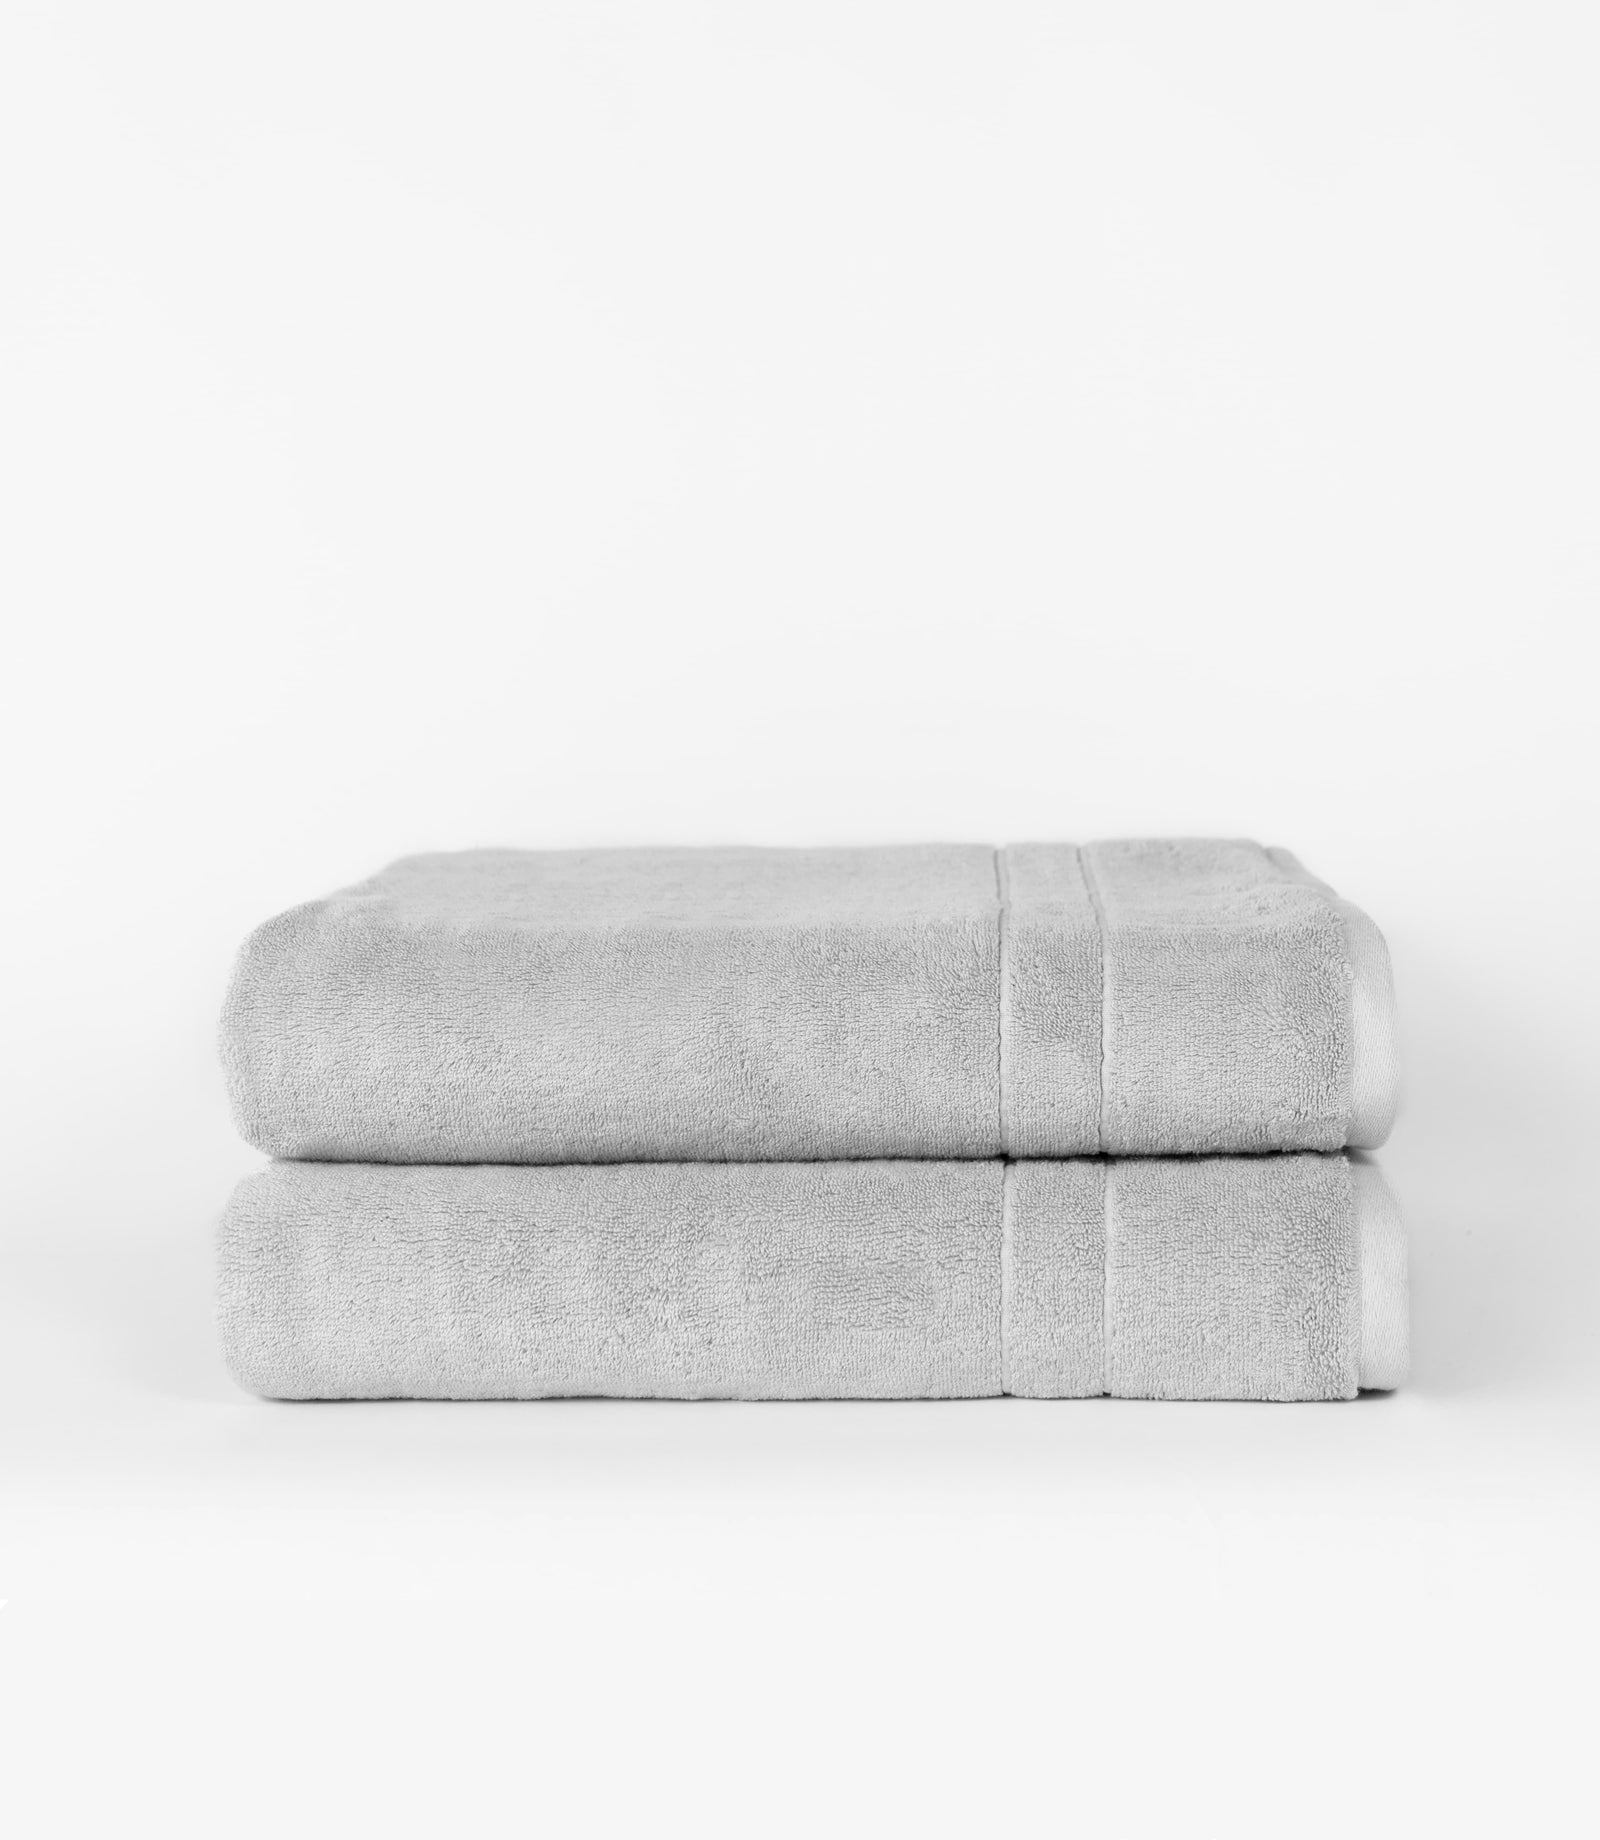 Premium Plush Bath Sheets in the color light grey. Photo of bath sheets taken with white background 